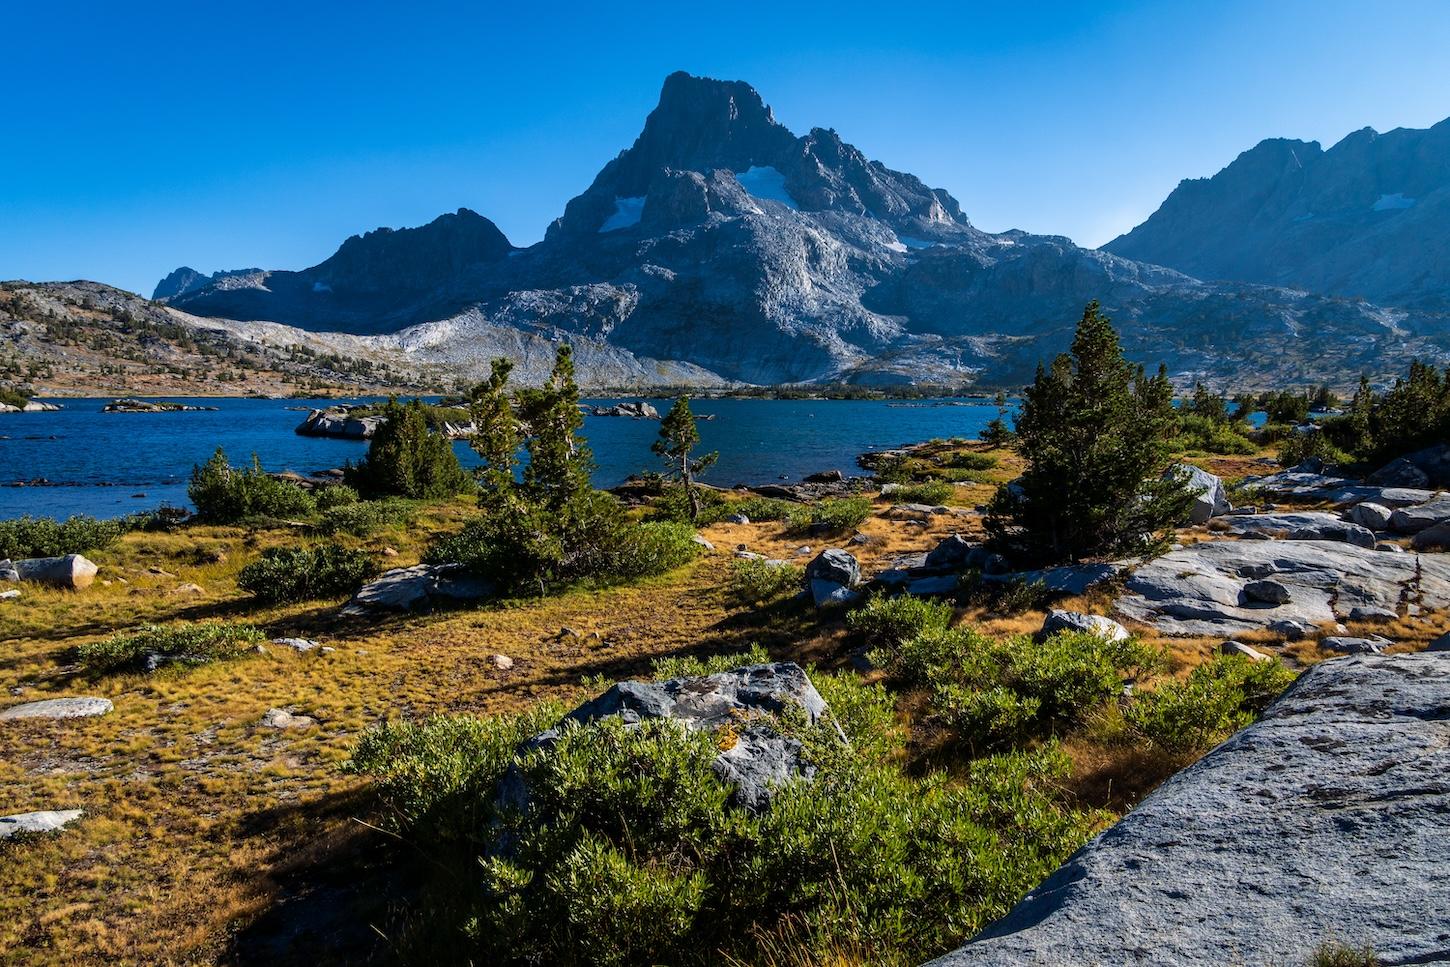 Thousand Island Lake in the Ansel Adams Wilderness of the Sierras